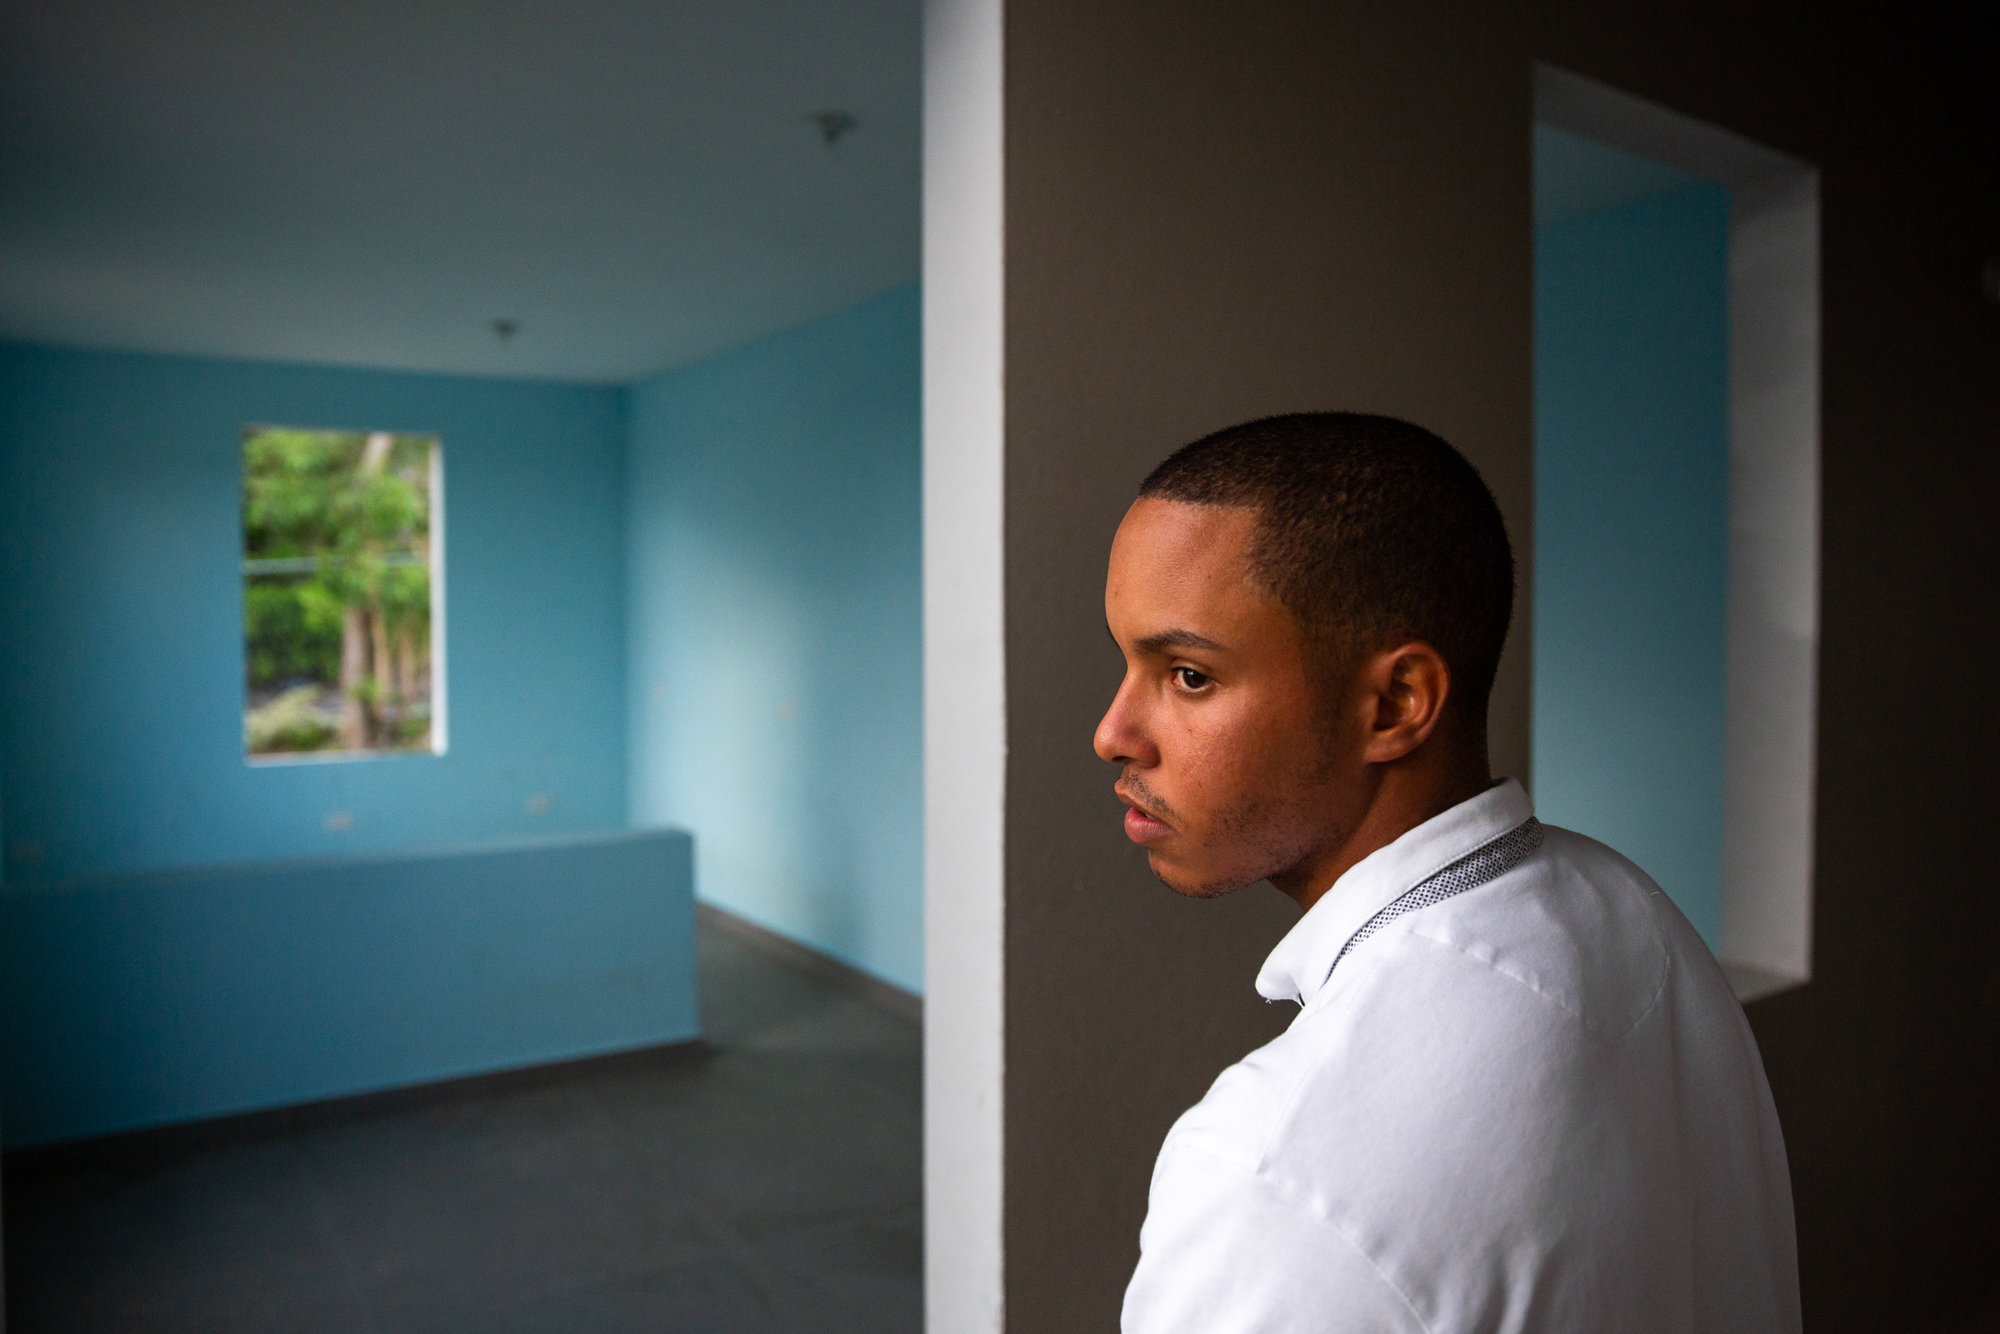 Omar Charriez - Omar Charriez, 22, has lived at the Forjadores de Esperanza shelter in Puerto Rico for nine years. During Hurricane Maria, the shelter lost its roof and Charriez helped the other boys stay calm. After the storm was over, Charriez worried about the shelter's future. “I was thinking ‘What is going to happen now?’” he recalled. “If the shelter is actually going to close, what is going to happen with the kids?” (Ellen O'Brien/News21)